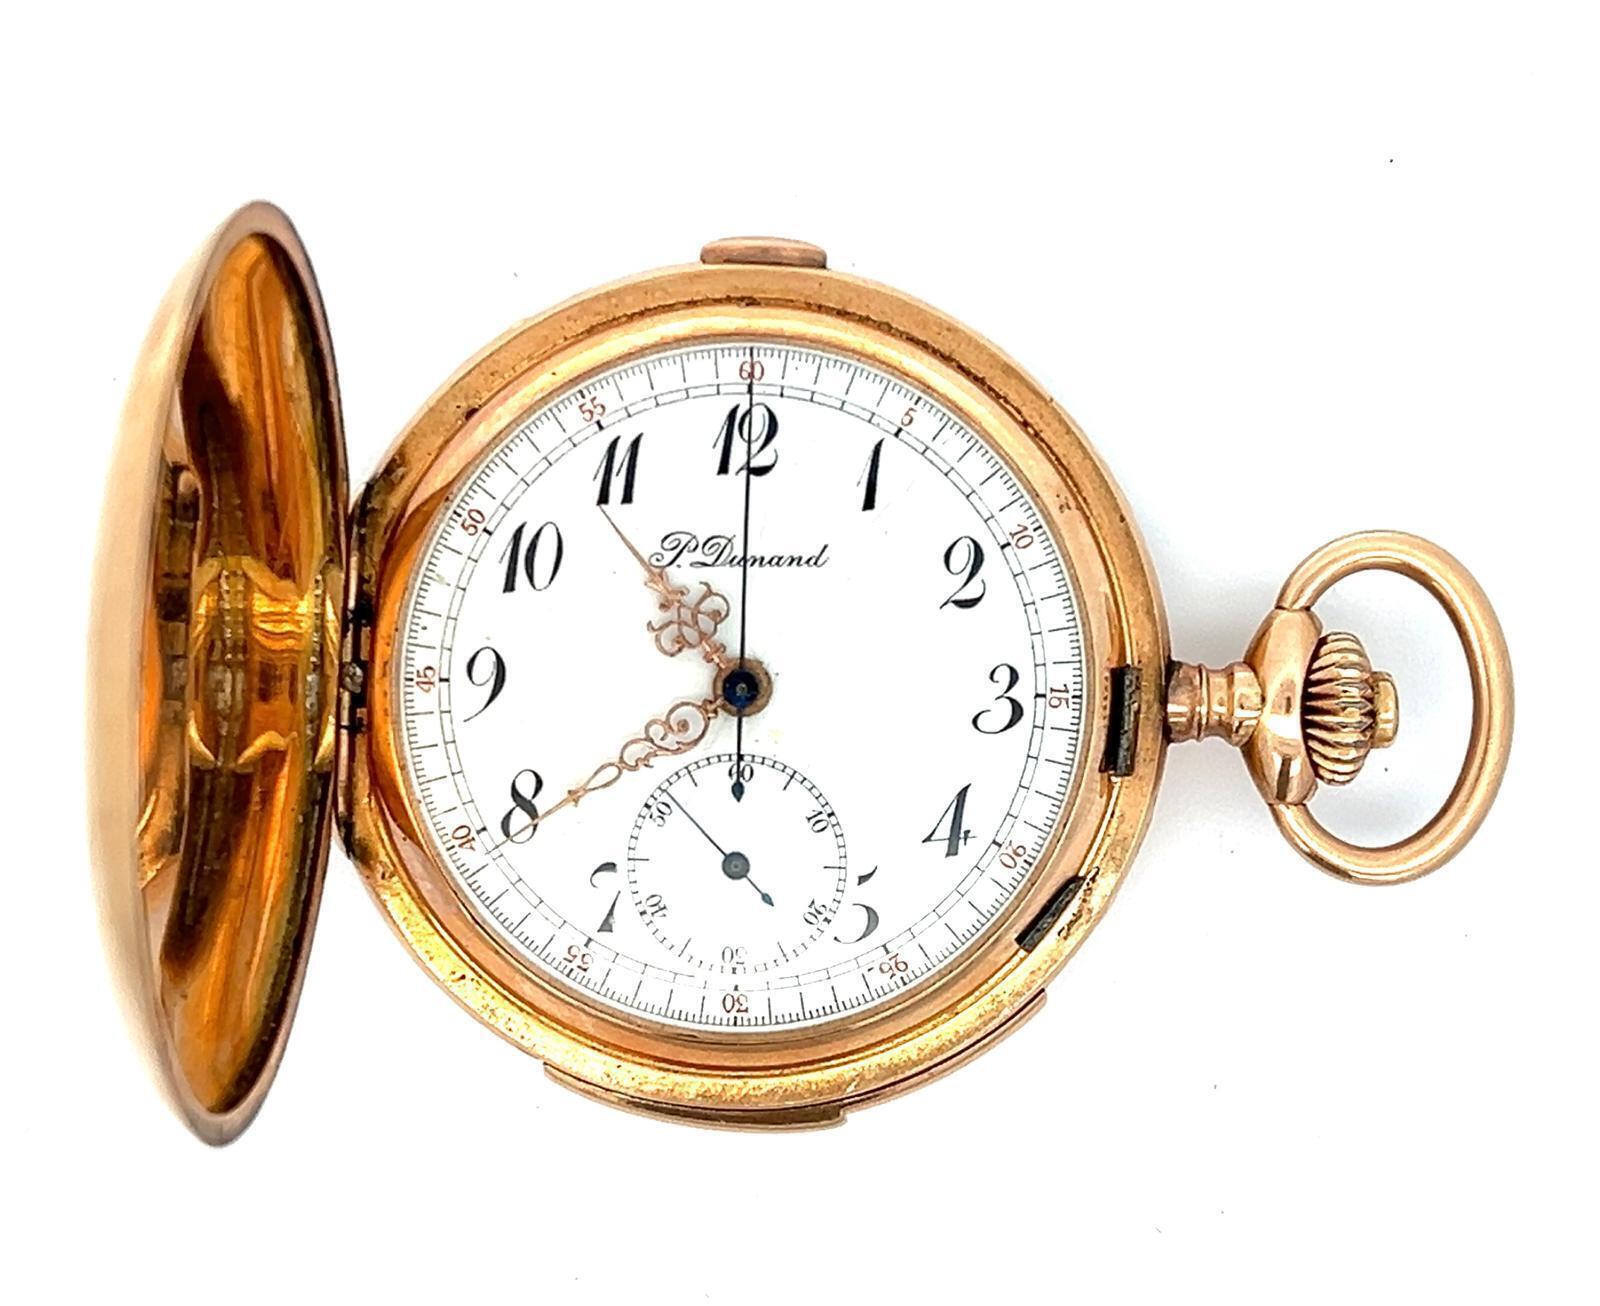 MINUTE REPEATER CHRONOGRAPH P. DUNAND 14K ROSE GOLD HUNTING CASE POCKET WATCH